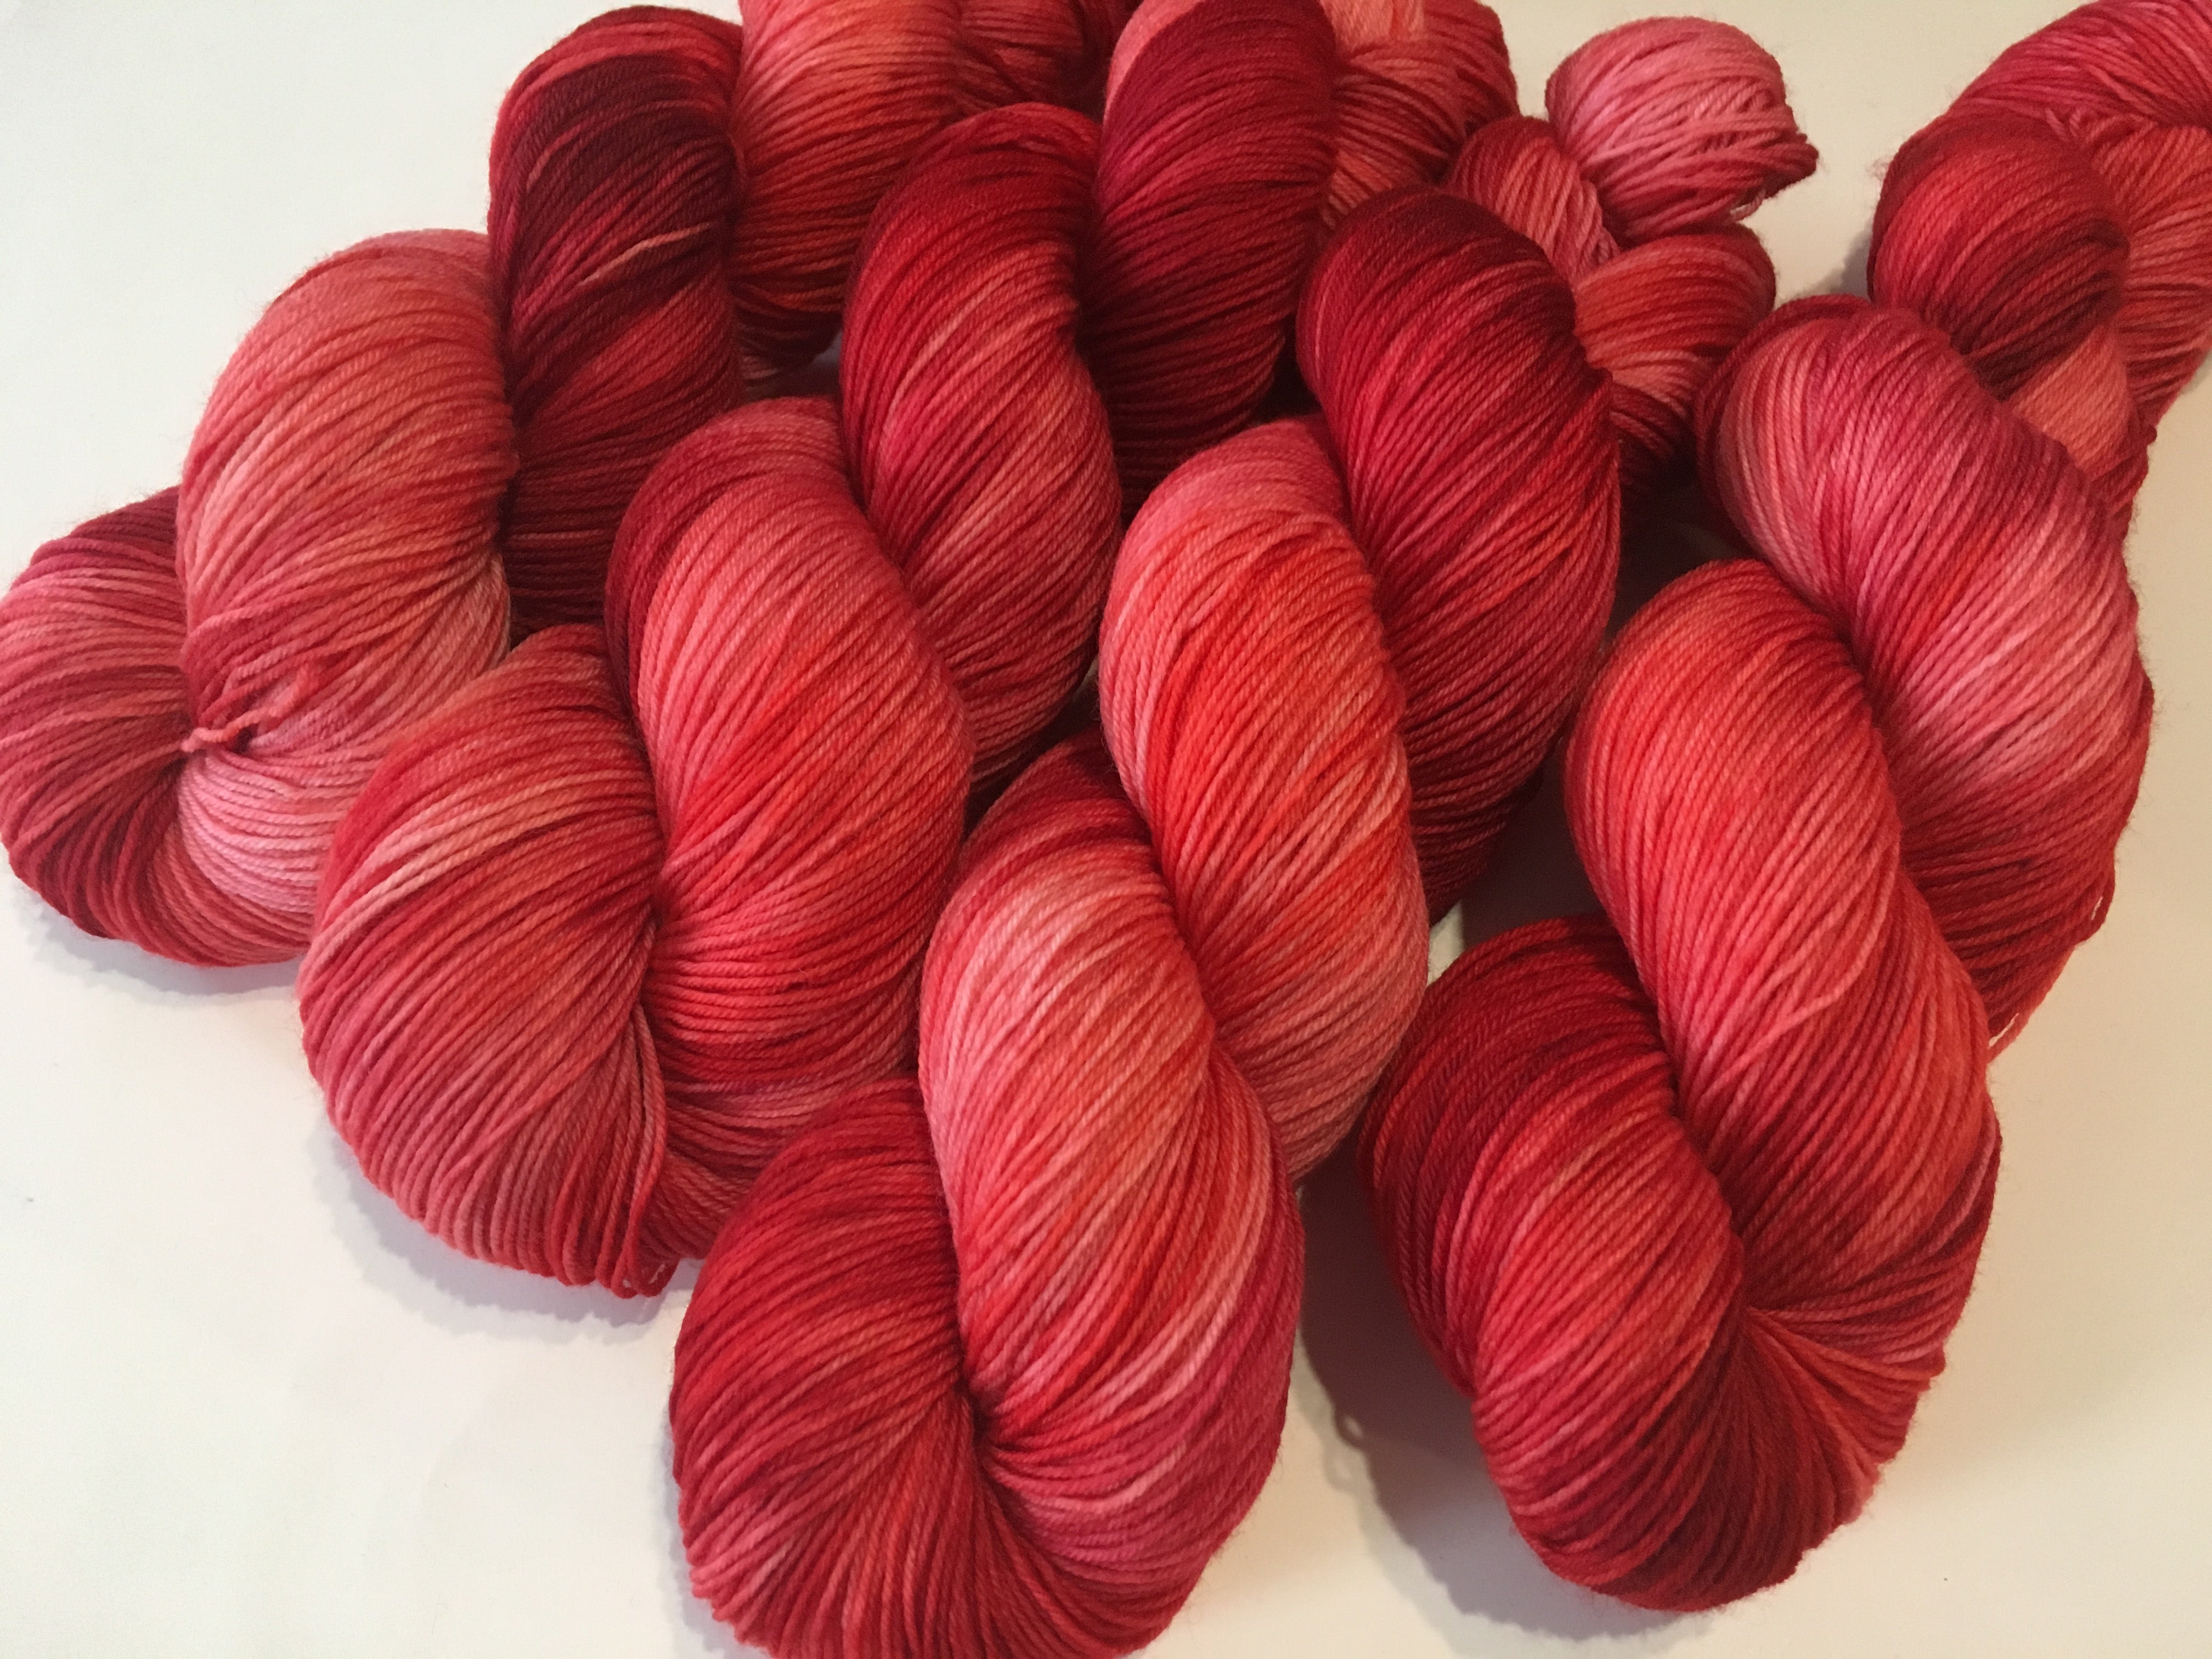 kettle dyed tonal red yarn for weaving, knitting and crochet projects